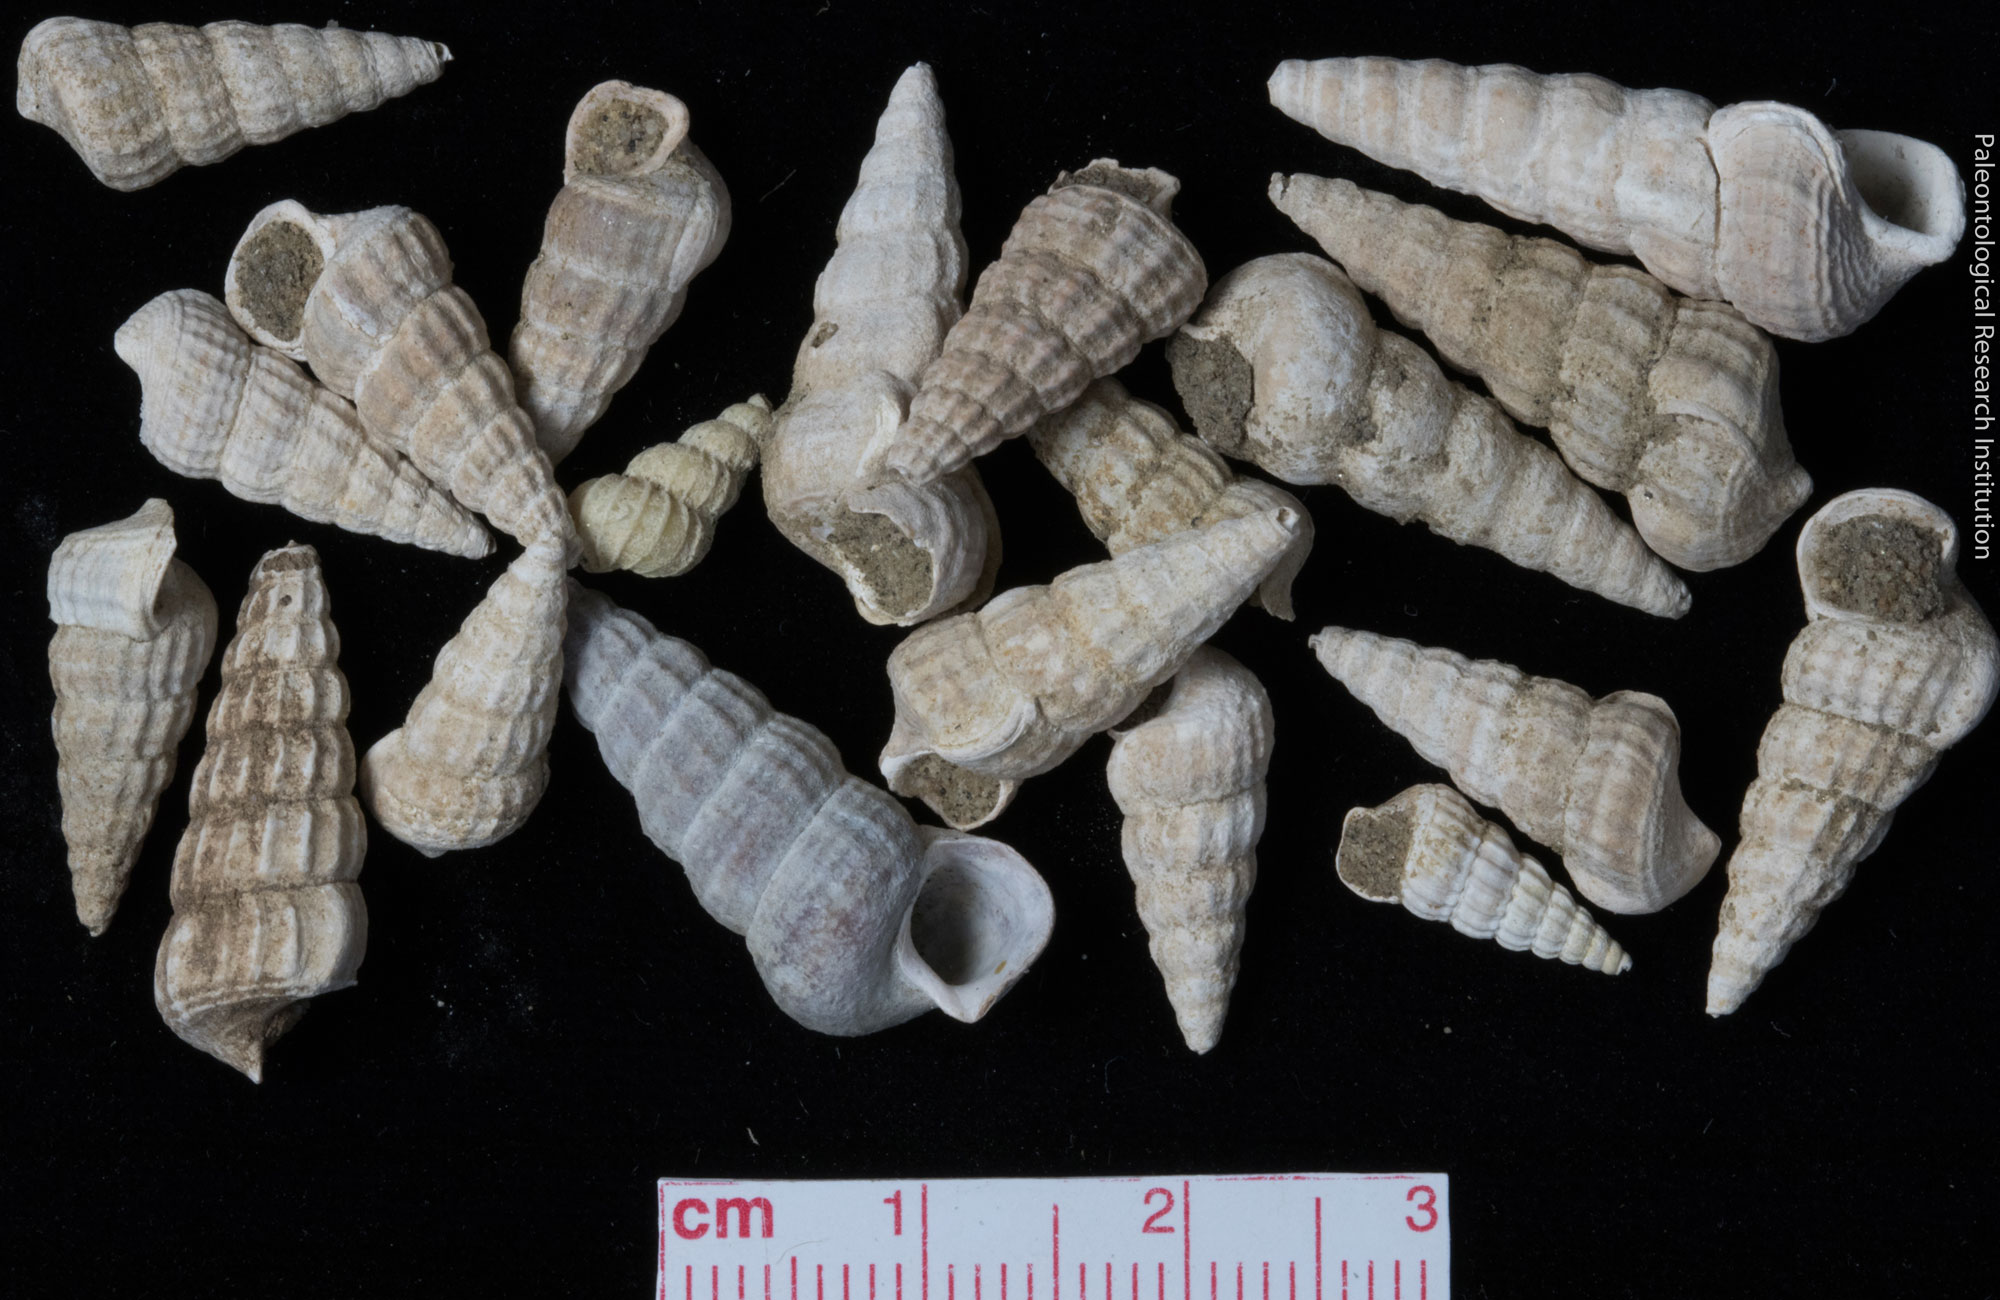 Photograph of a group of horn snail shells from the Pleistocene of California. The shells are elongated and narrow with a series of longitudinal ridges running around each turn of the shell. The photo shows about 20 shells that are randomly arranged. 